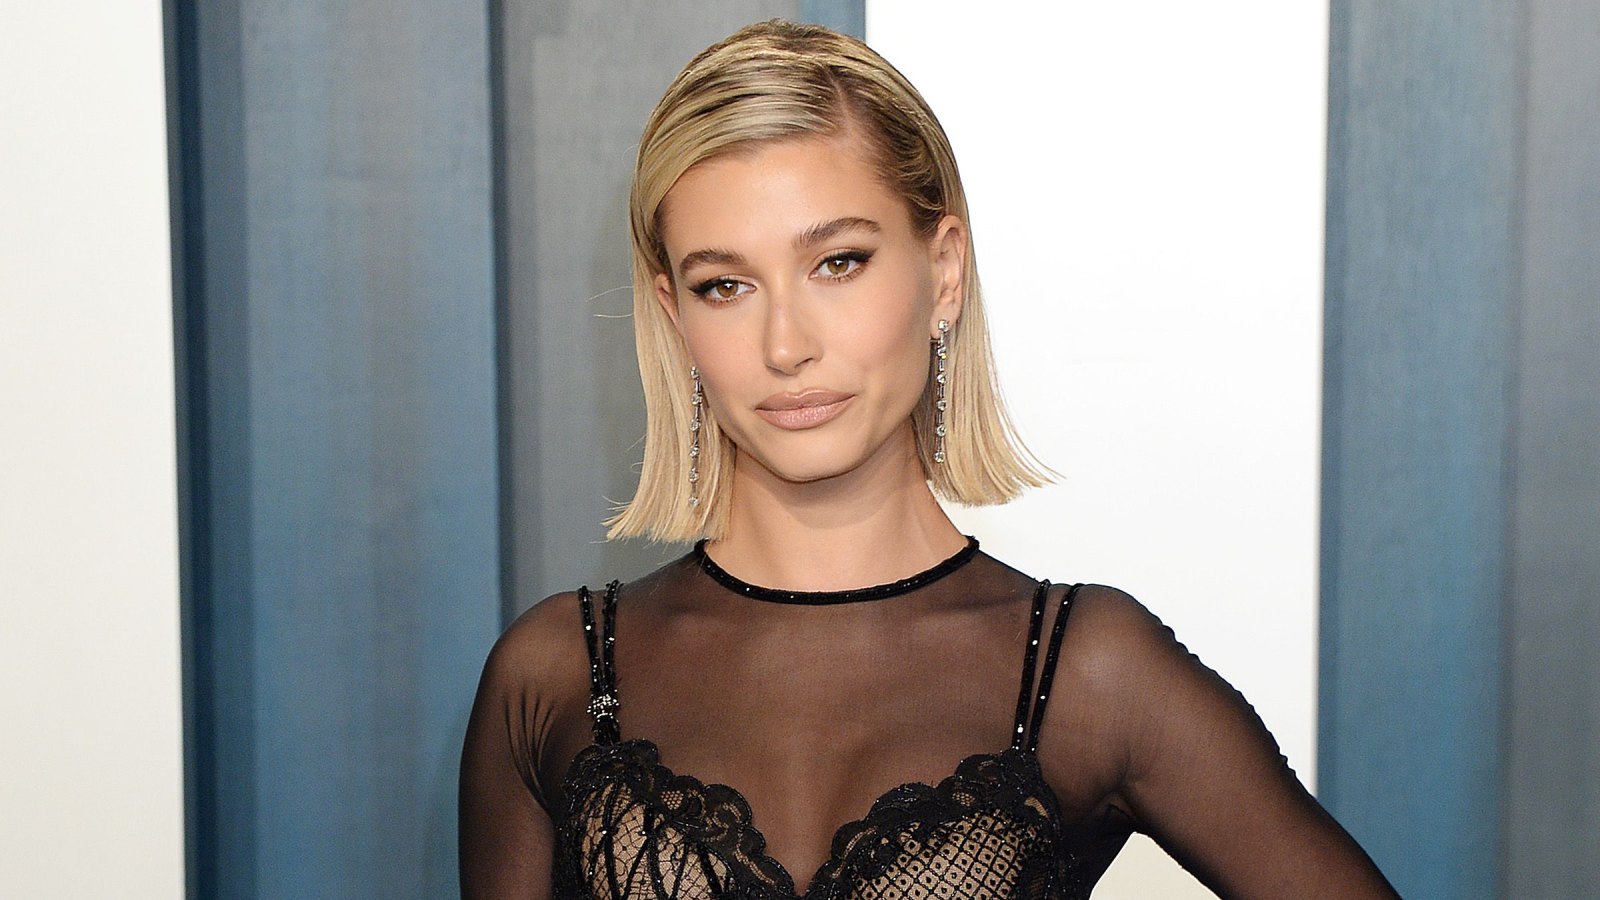 Hailey Bieber Vanity Fair attends the 2020 Oscar Party in Los Angeles.